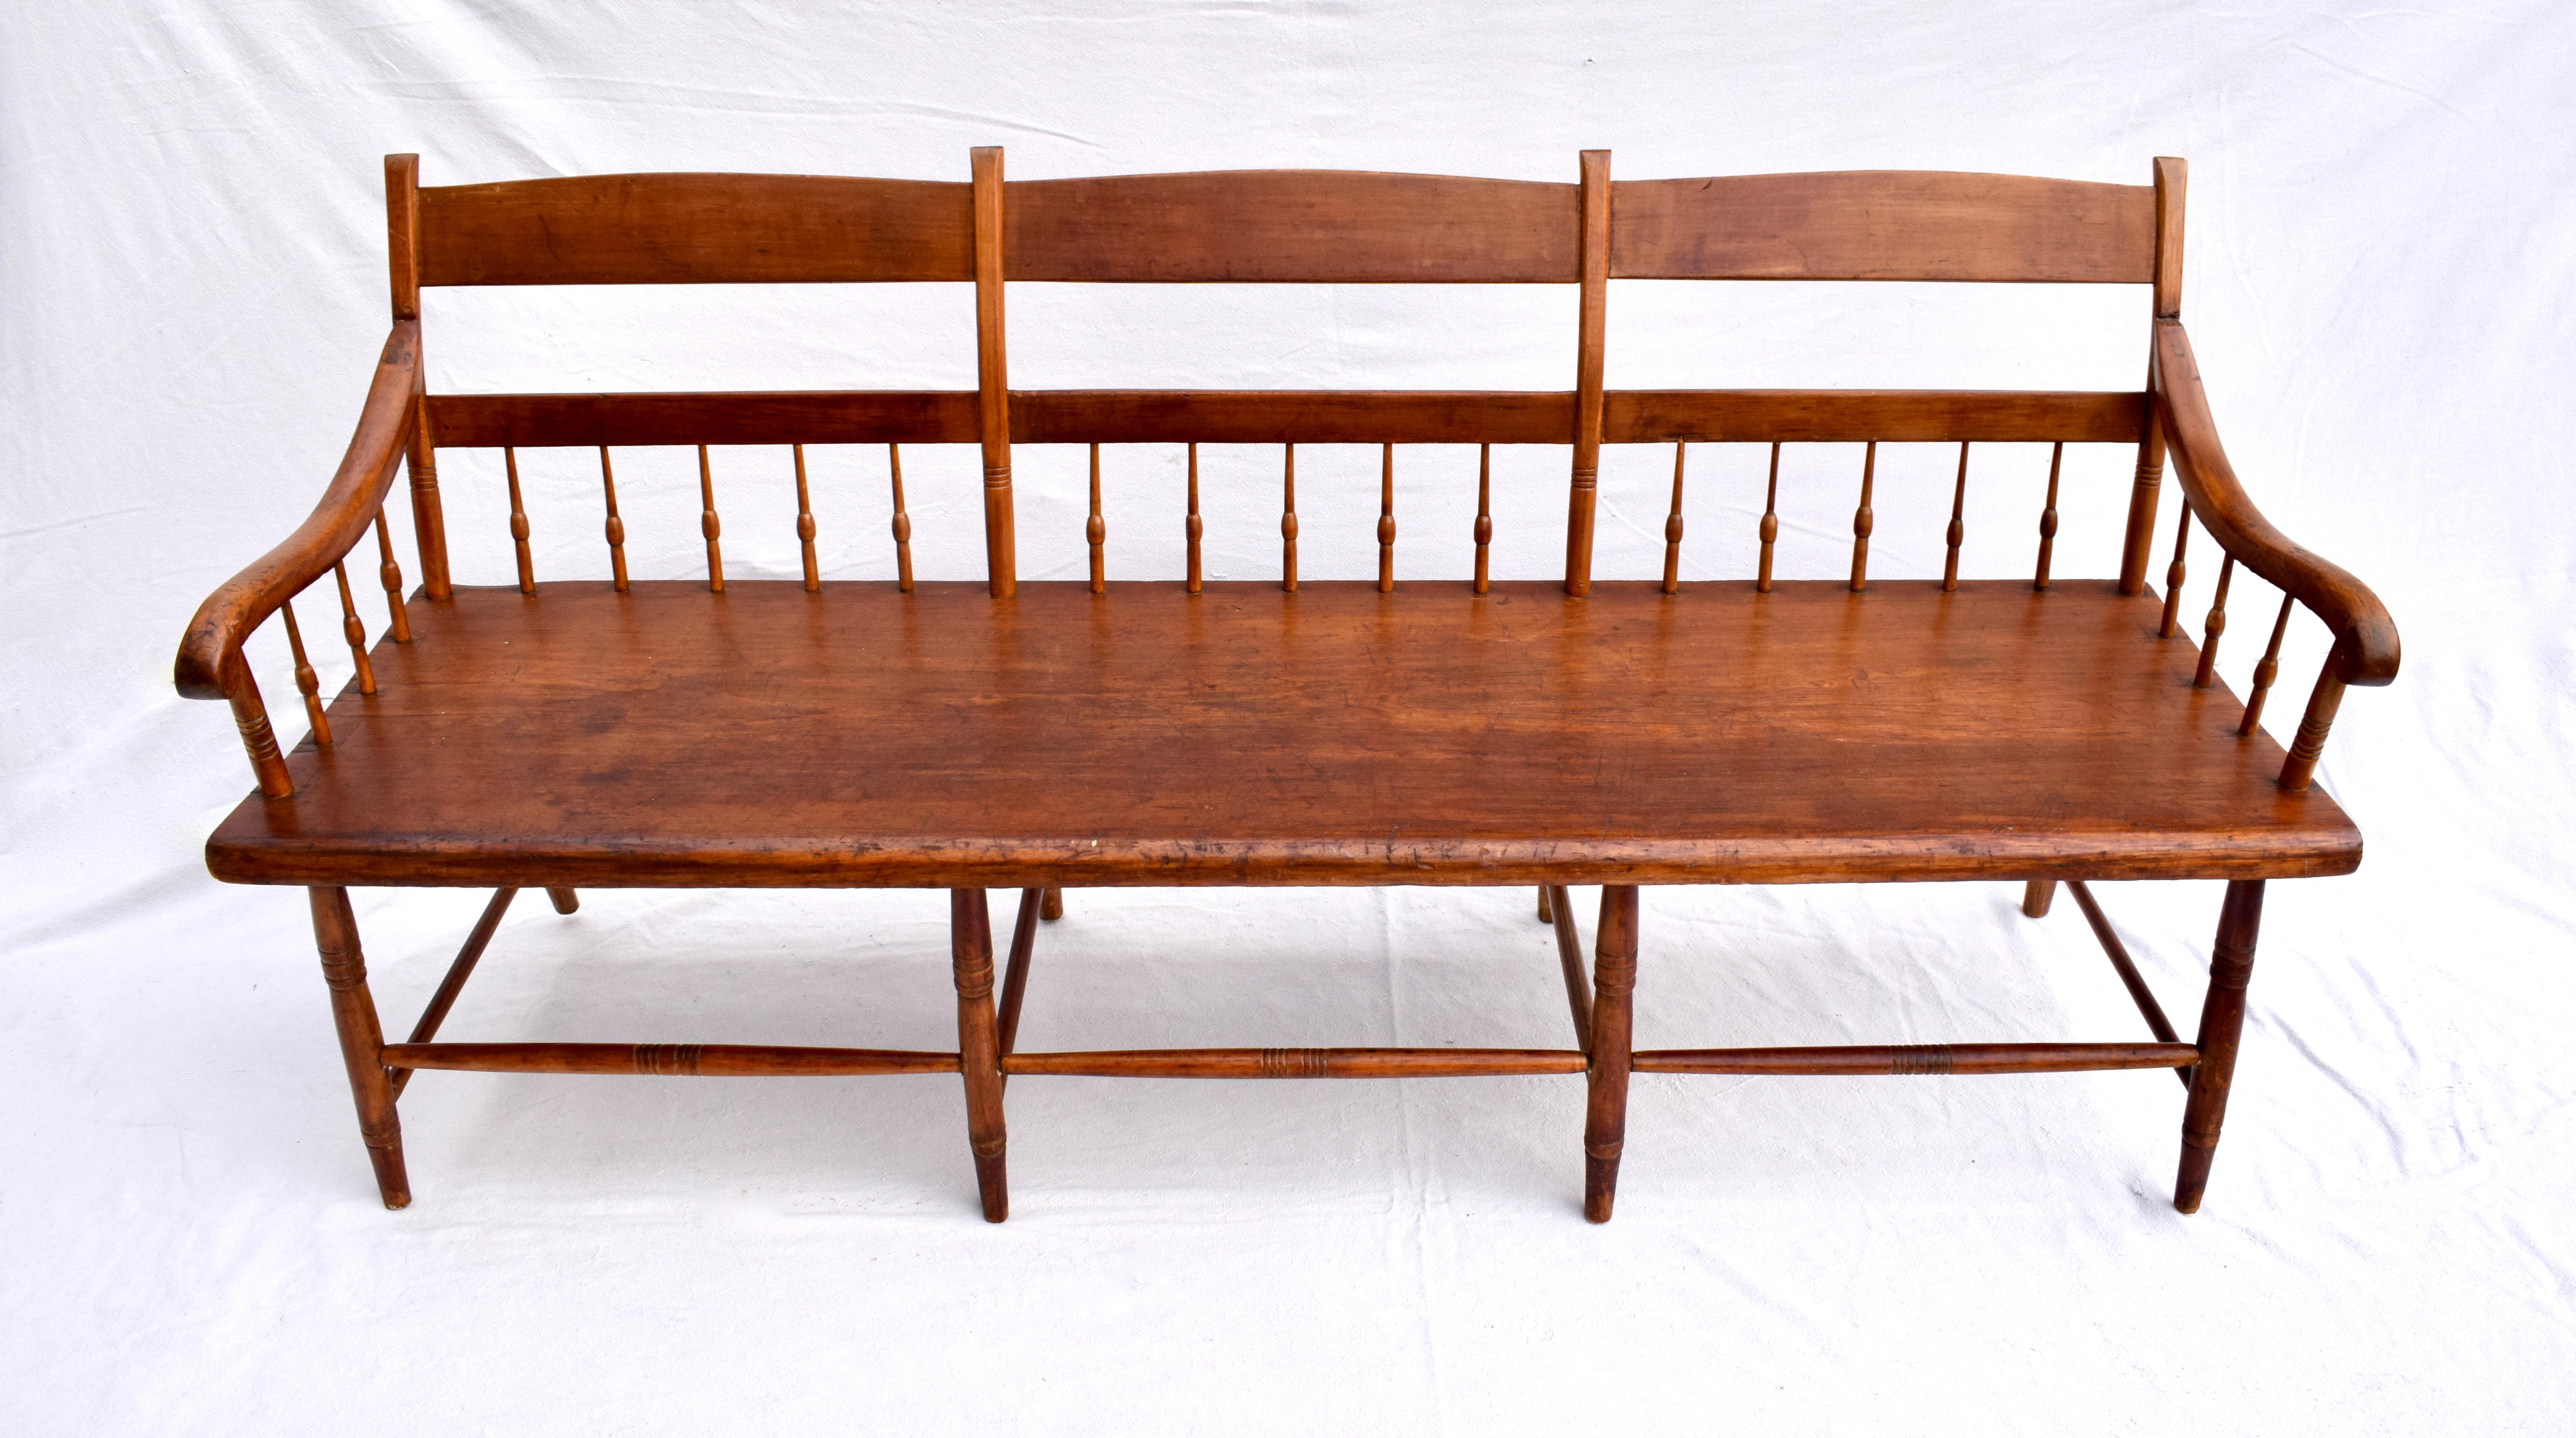 An American 19th century Pennsylvania deep single board plank-seat bench in the half-spindle-back style with mortis & tenon joinery. Beautifully maintained original finish & patina fully hand detailed enhanced with new upholstered custom notched